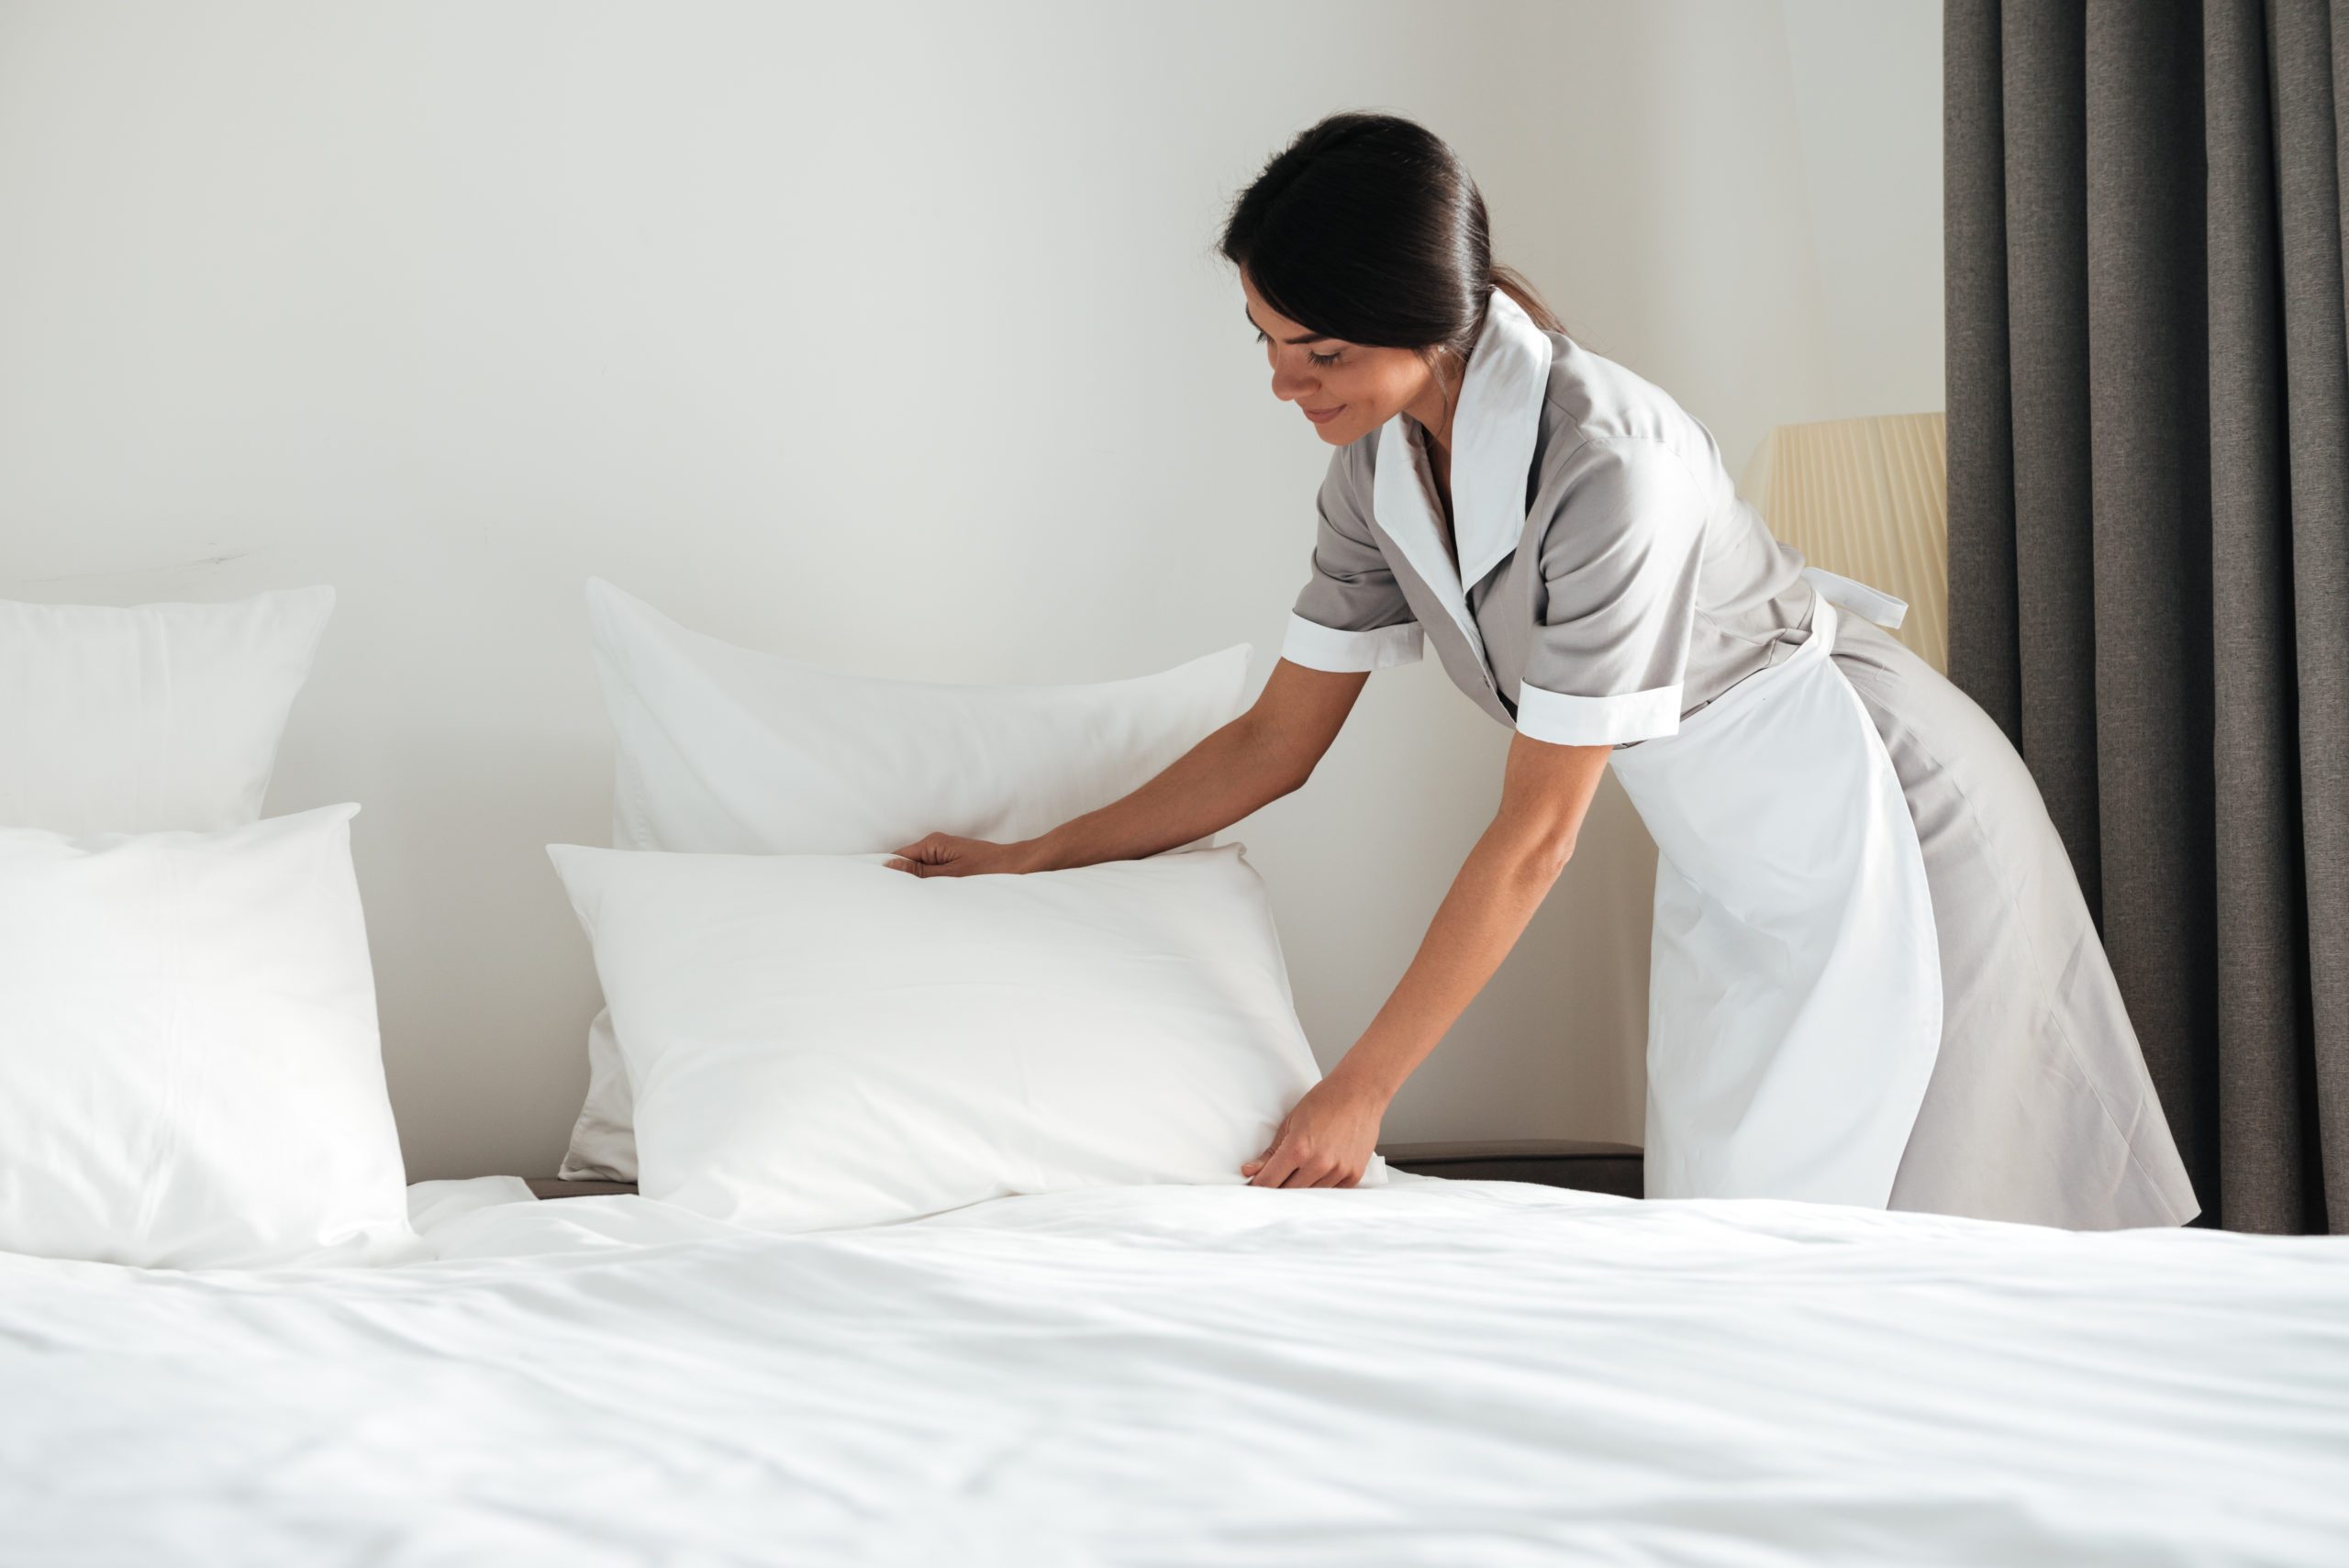 Young hotel maid setting up pillow on bed